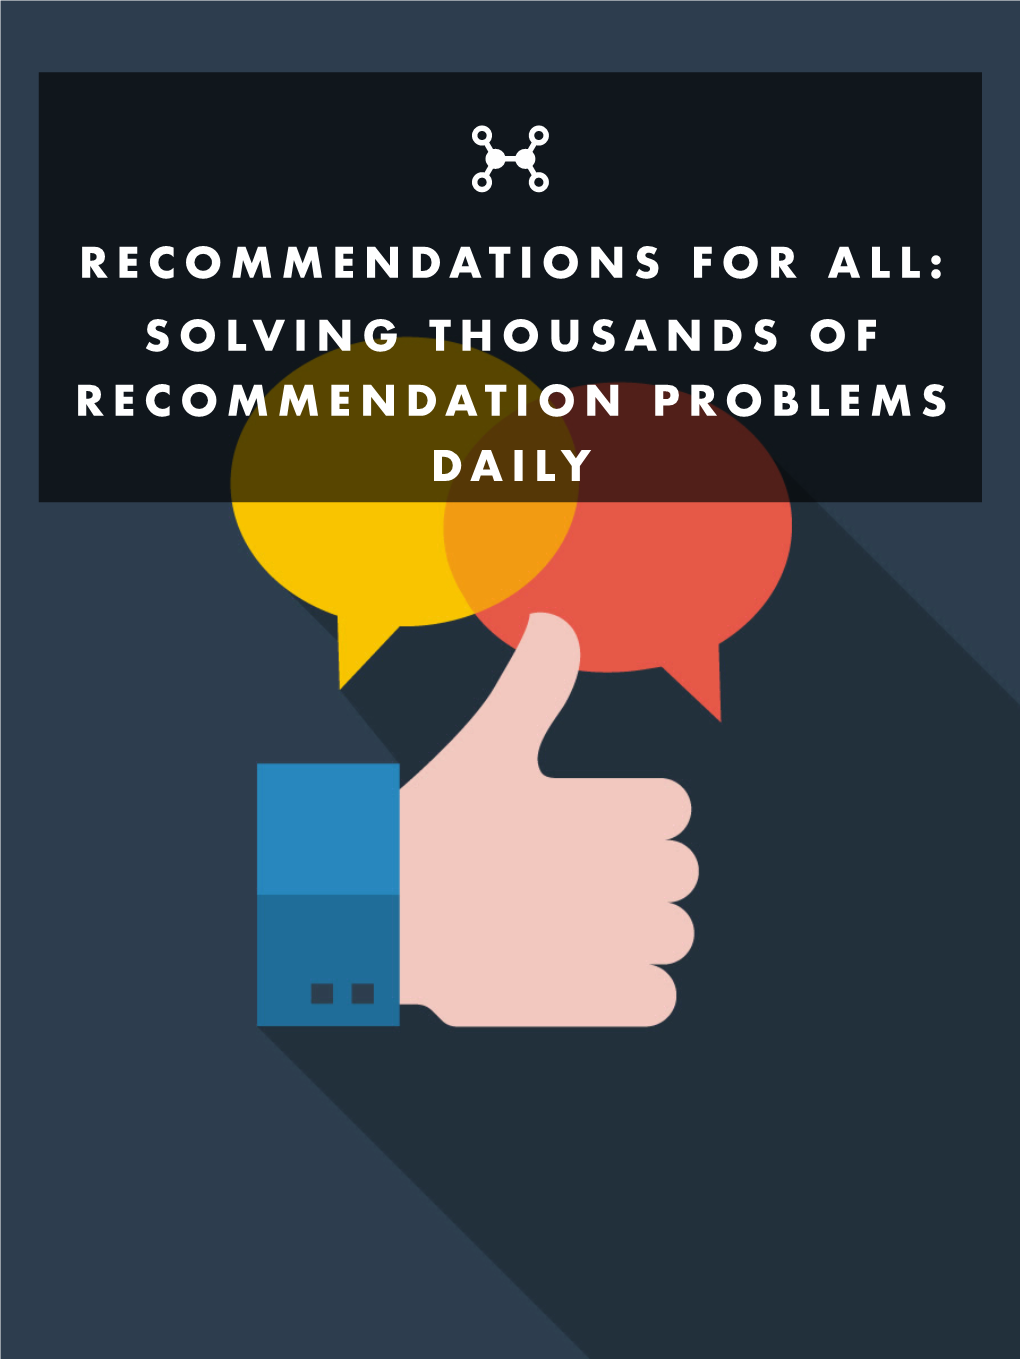 RECOMMENDATIONS for ALL: SOLVING THOUSANDS of RECOMMENDATION PROBLEMS DAILY Recommendations for All : Solving Thousands of Recommendation Problems Daily